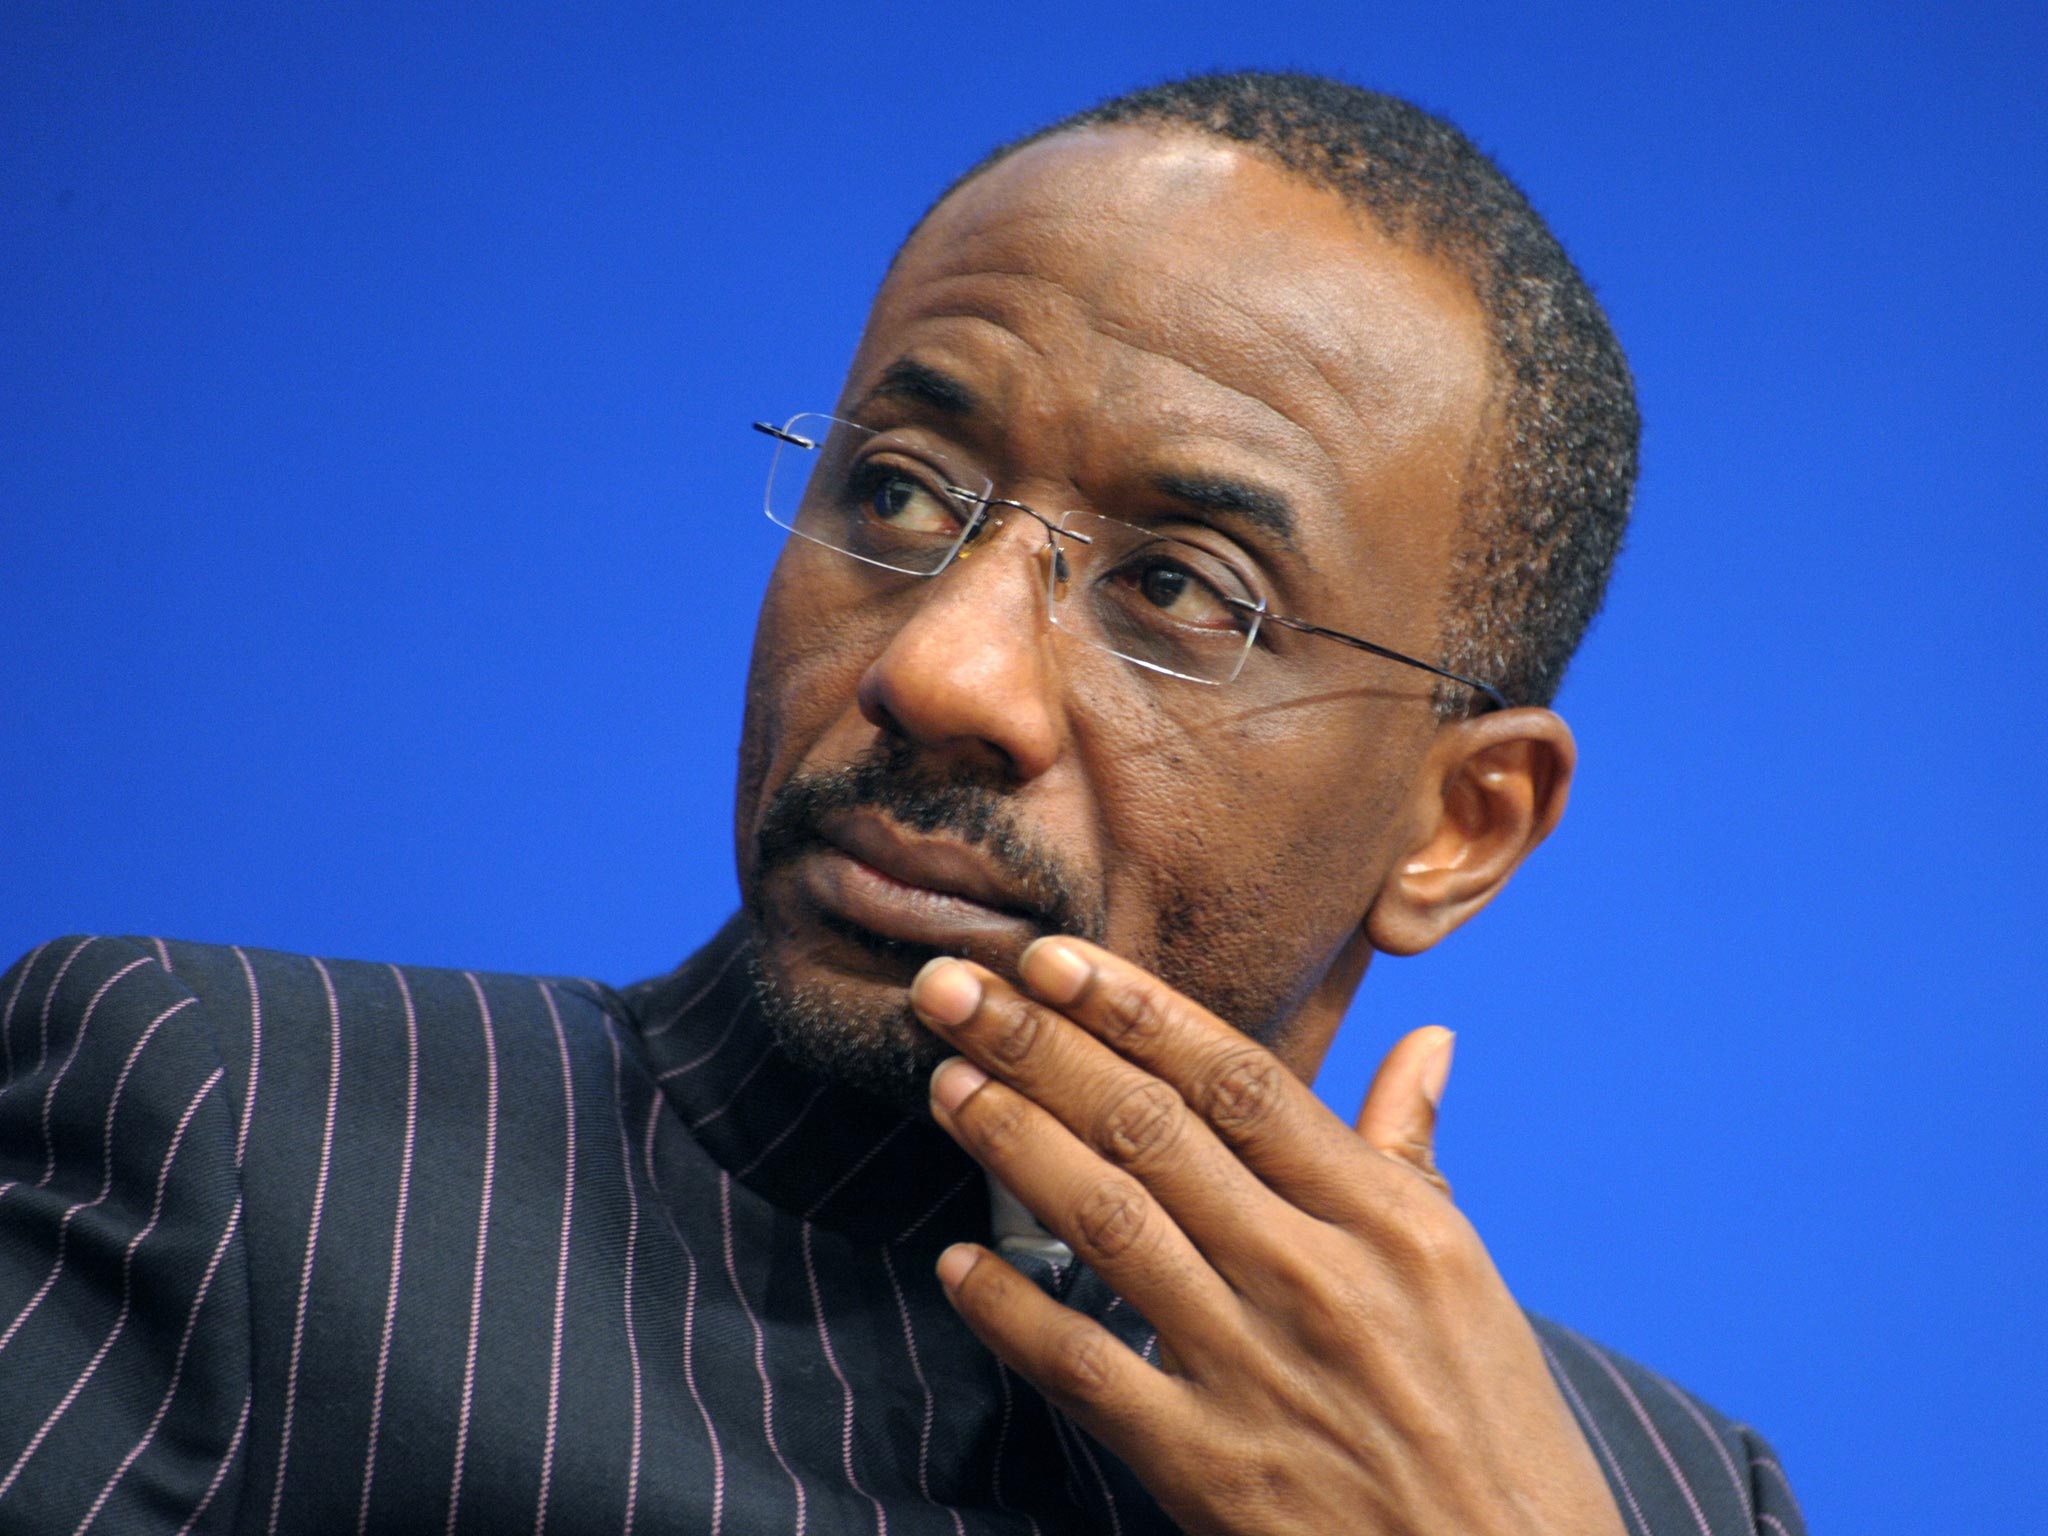 Lamido Sanusi received death threats after he took on bank CEOs who had stolen billions in deposits when he took office in 2009; he said he recognised the move would pitch him against powerful forces